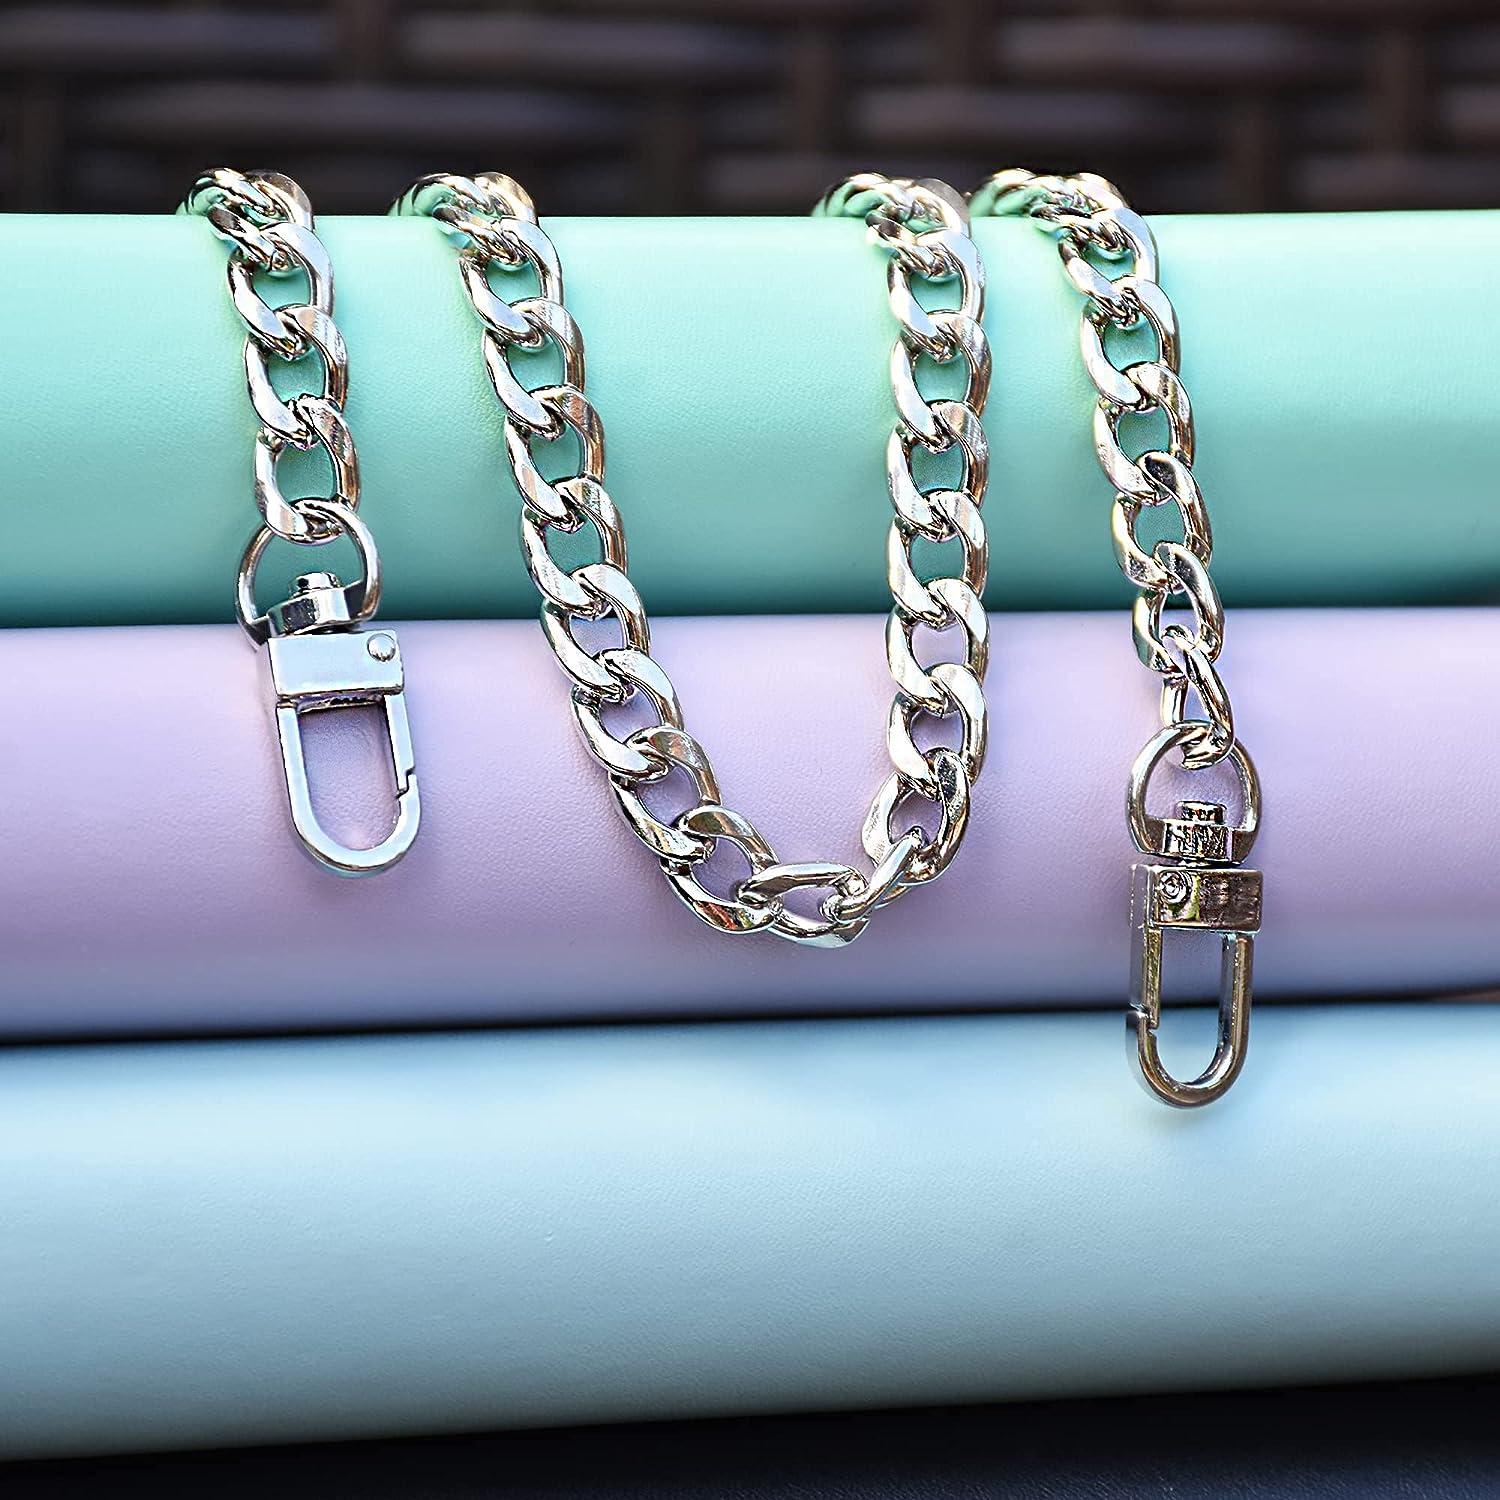 Simple Women's Bag Accessories Chain With Metal Buckles Iron